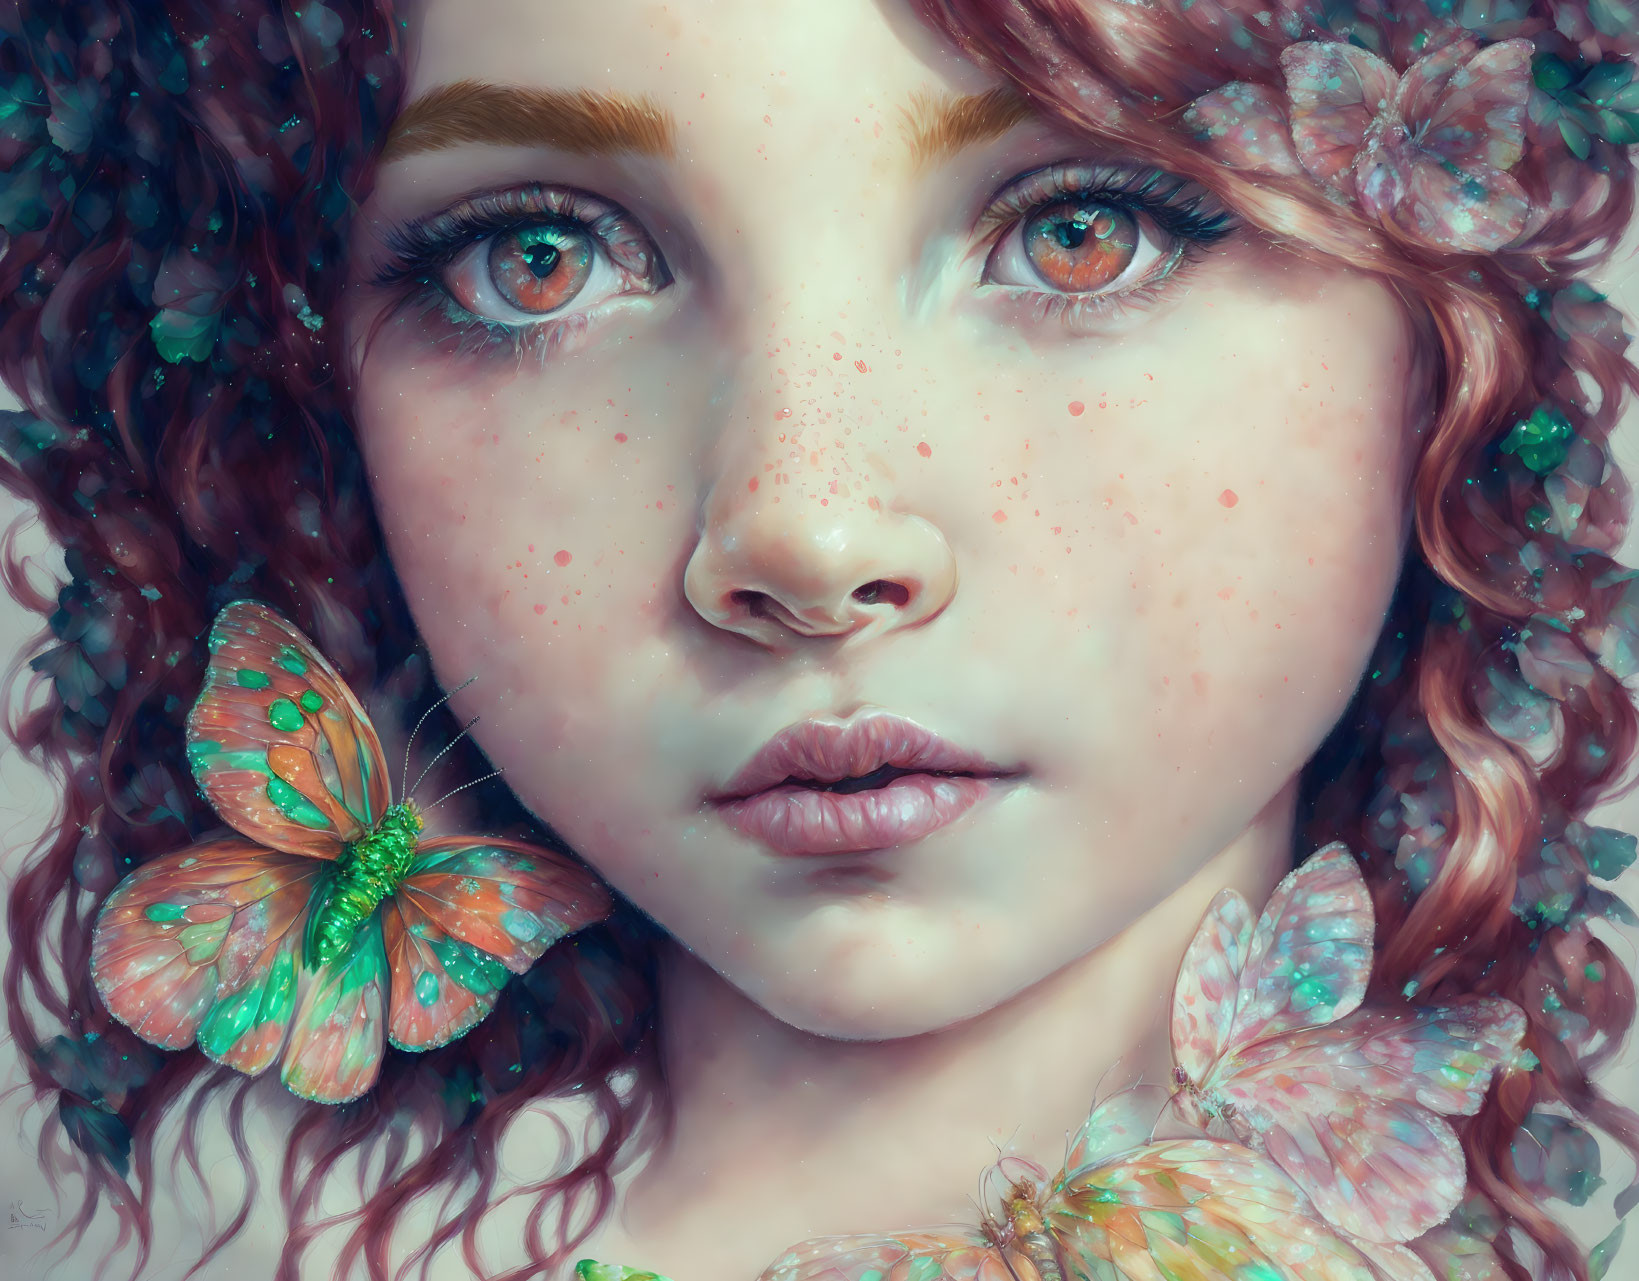 Detailed Illustration: Girl with Freckles, Hazel Eyes, Curly Hair, Flowers, Butter